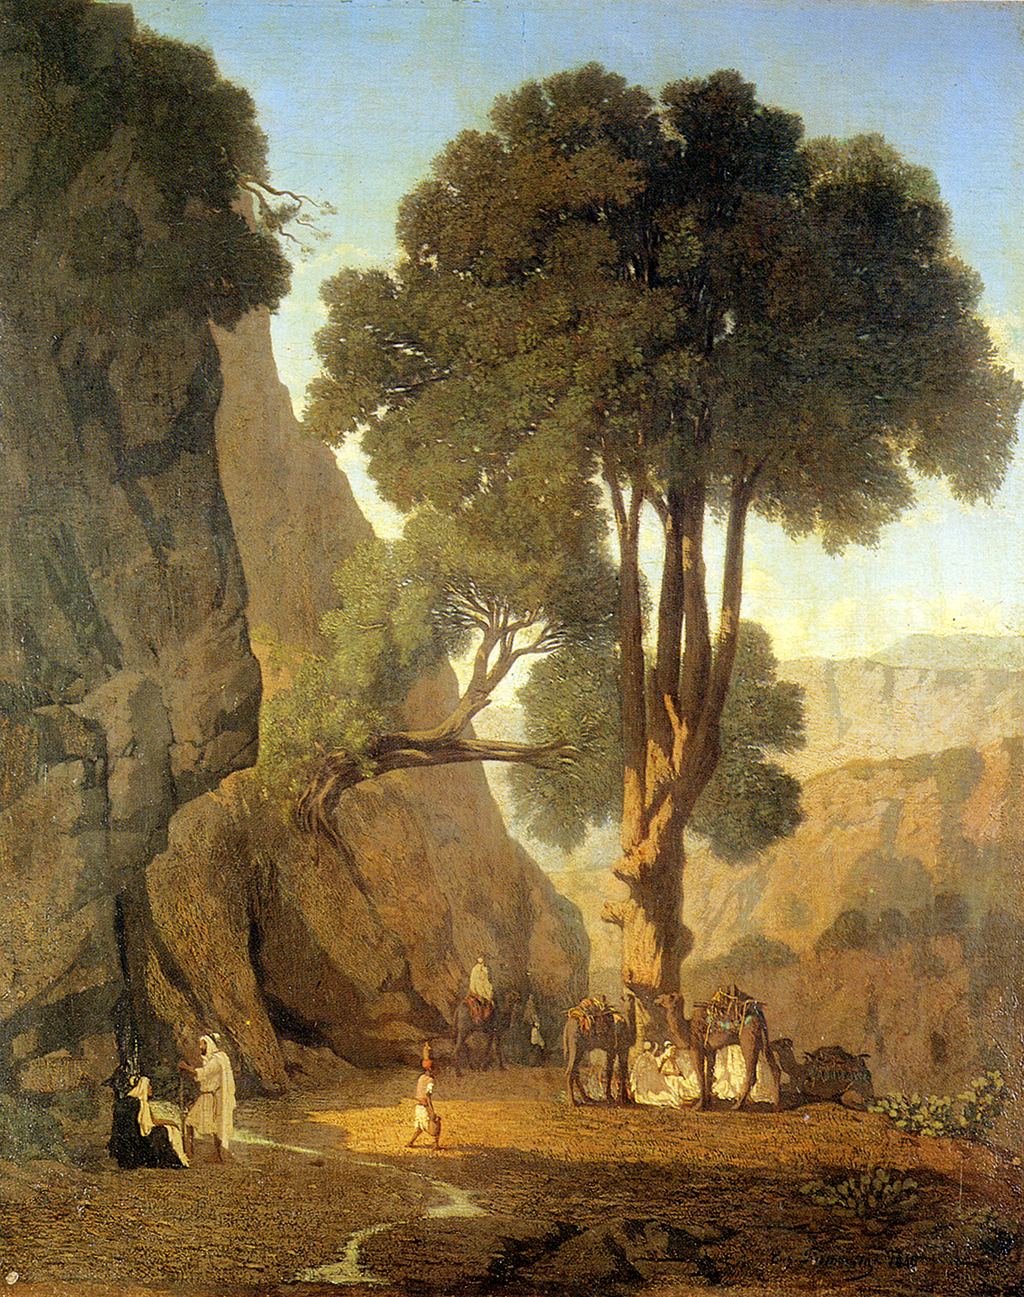 A painting of a rocky cliff with a group of travelers with their camels sitting under a tall tree with green leaves. The group wears long white tunics and hoods. In the background, there are large rock mountains overlapped by rolling hills.